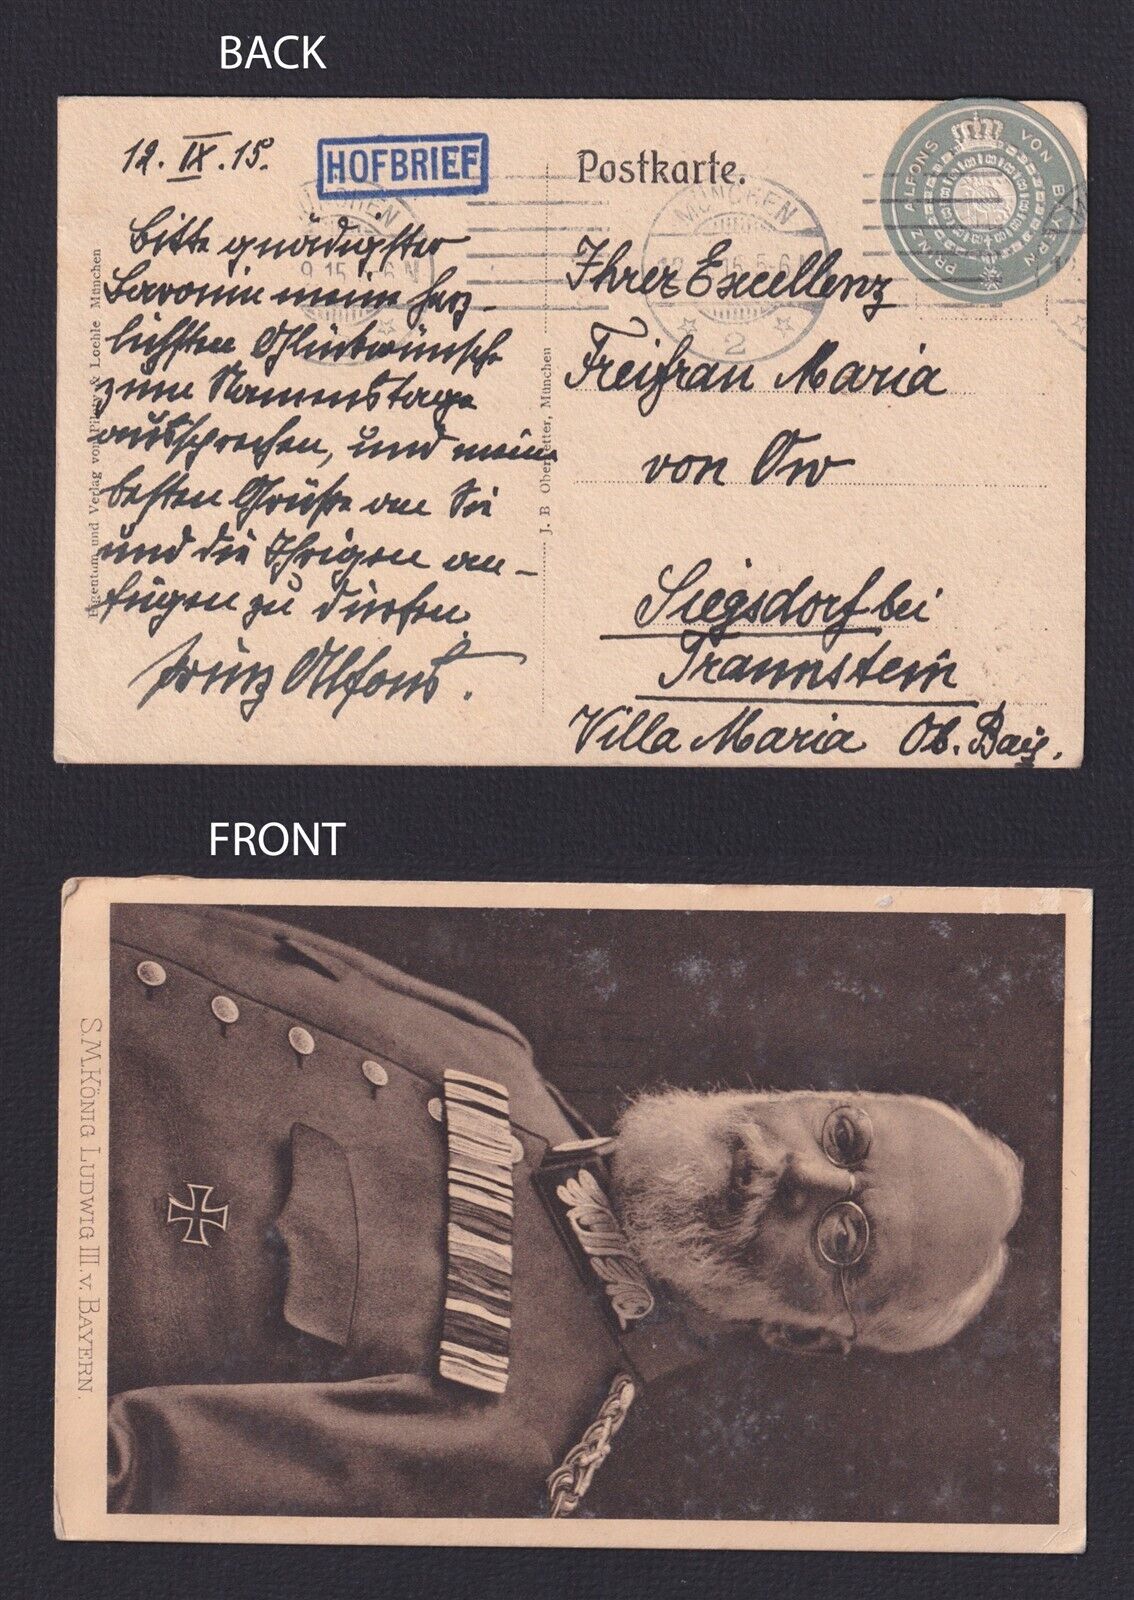 GERMANY 1915, Postcard written by Prince Alfons of Bavaria, Hofbrief, Autograph 